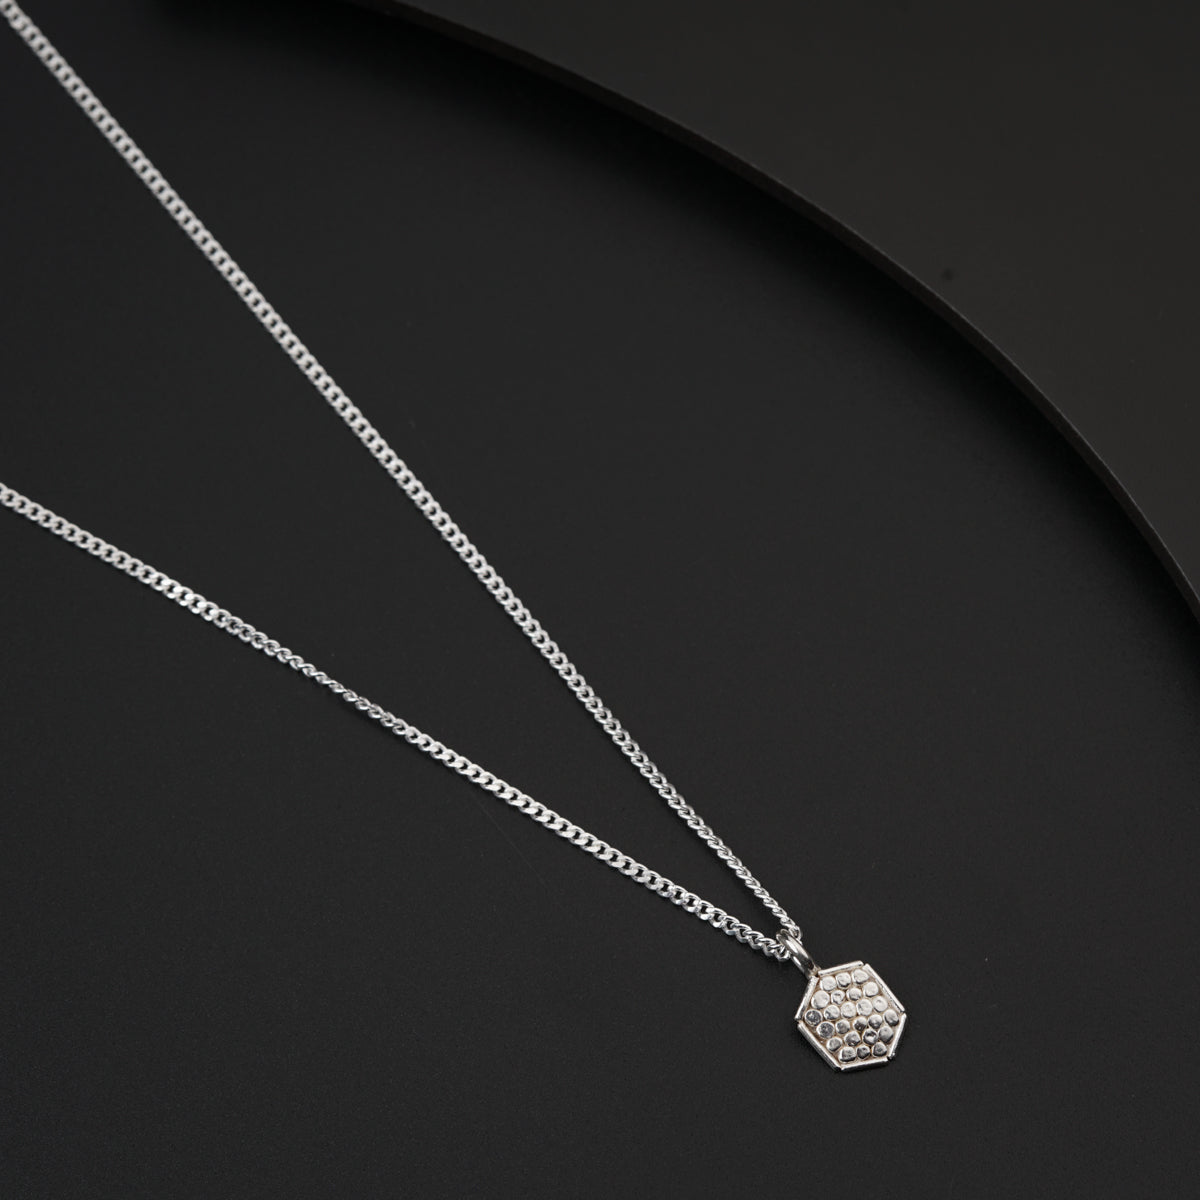 Daily Wear Silver Hammered Hexagon Necklace